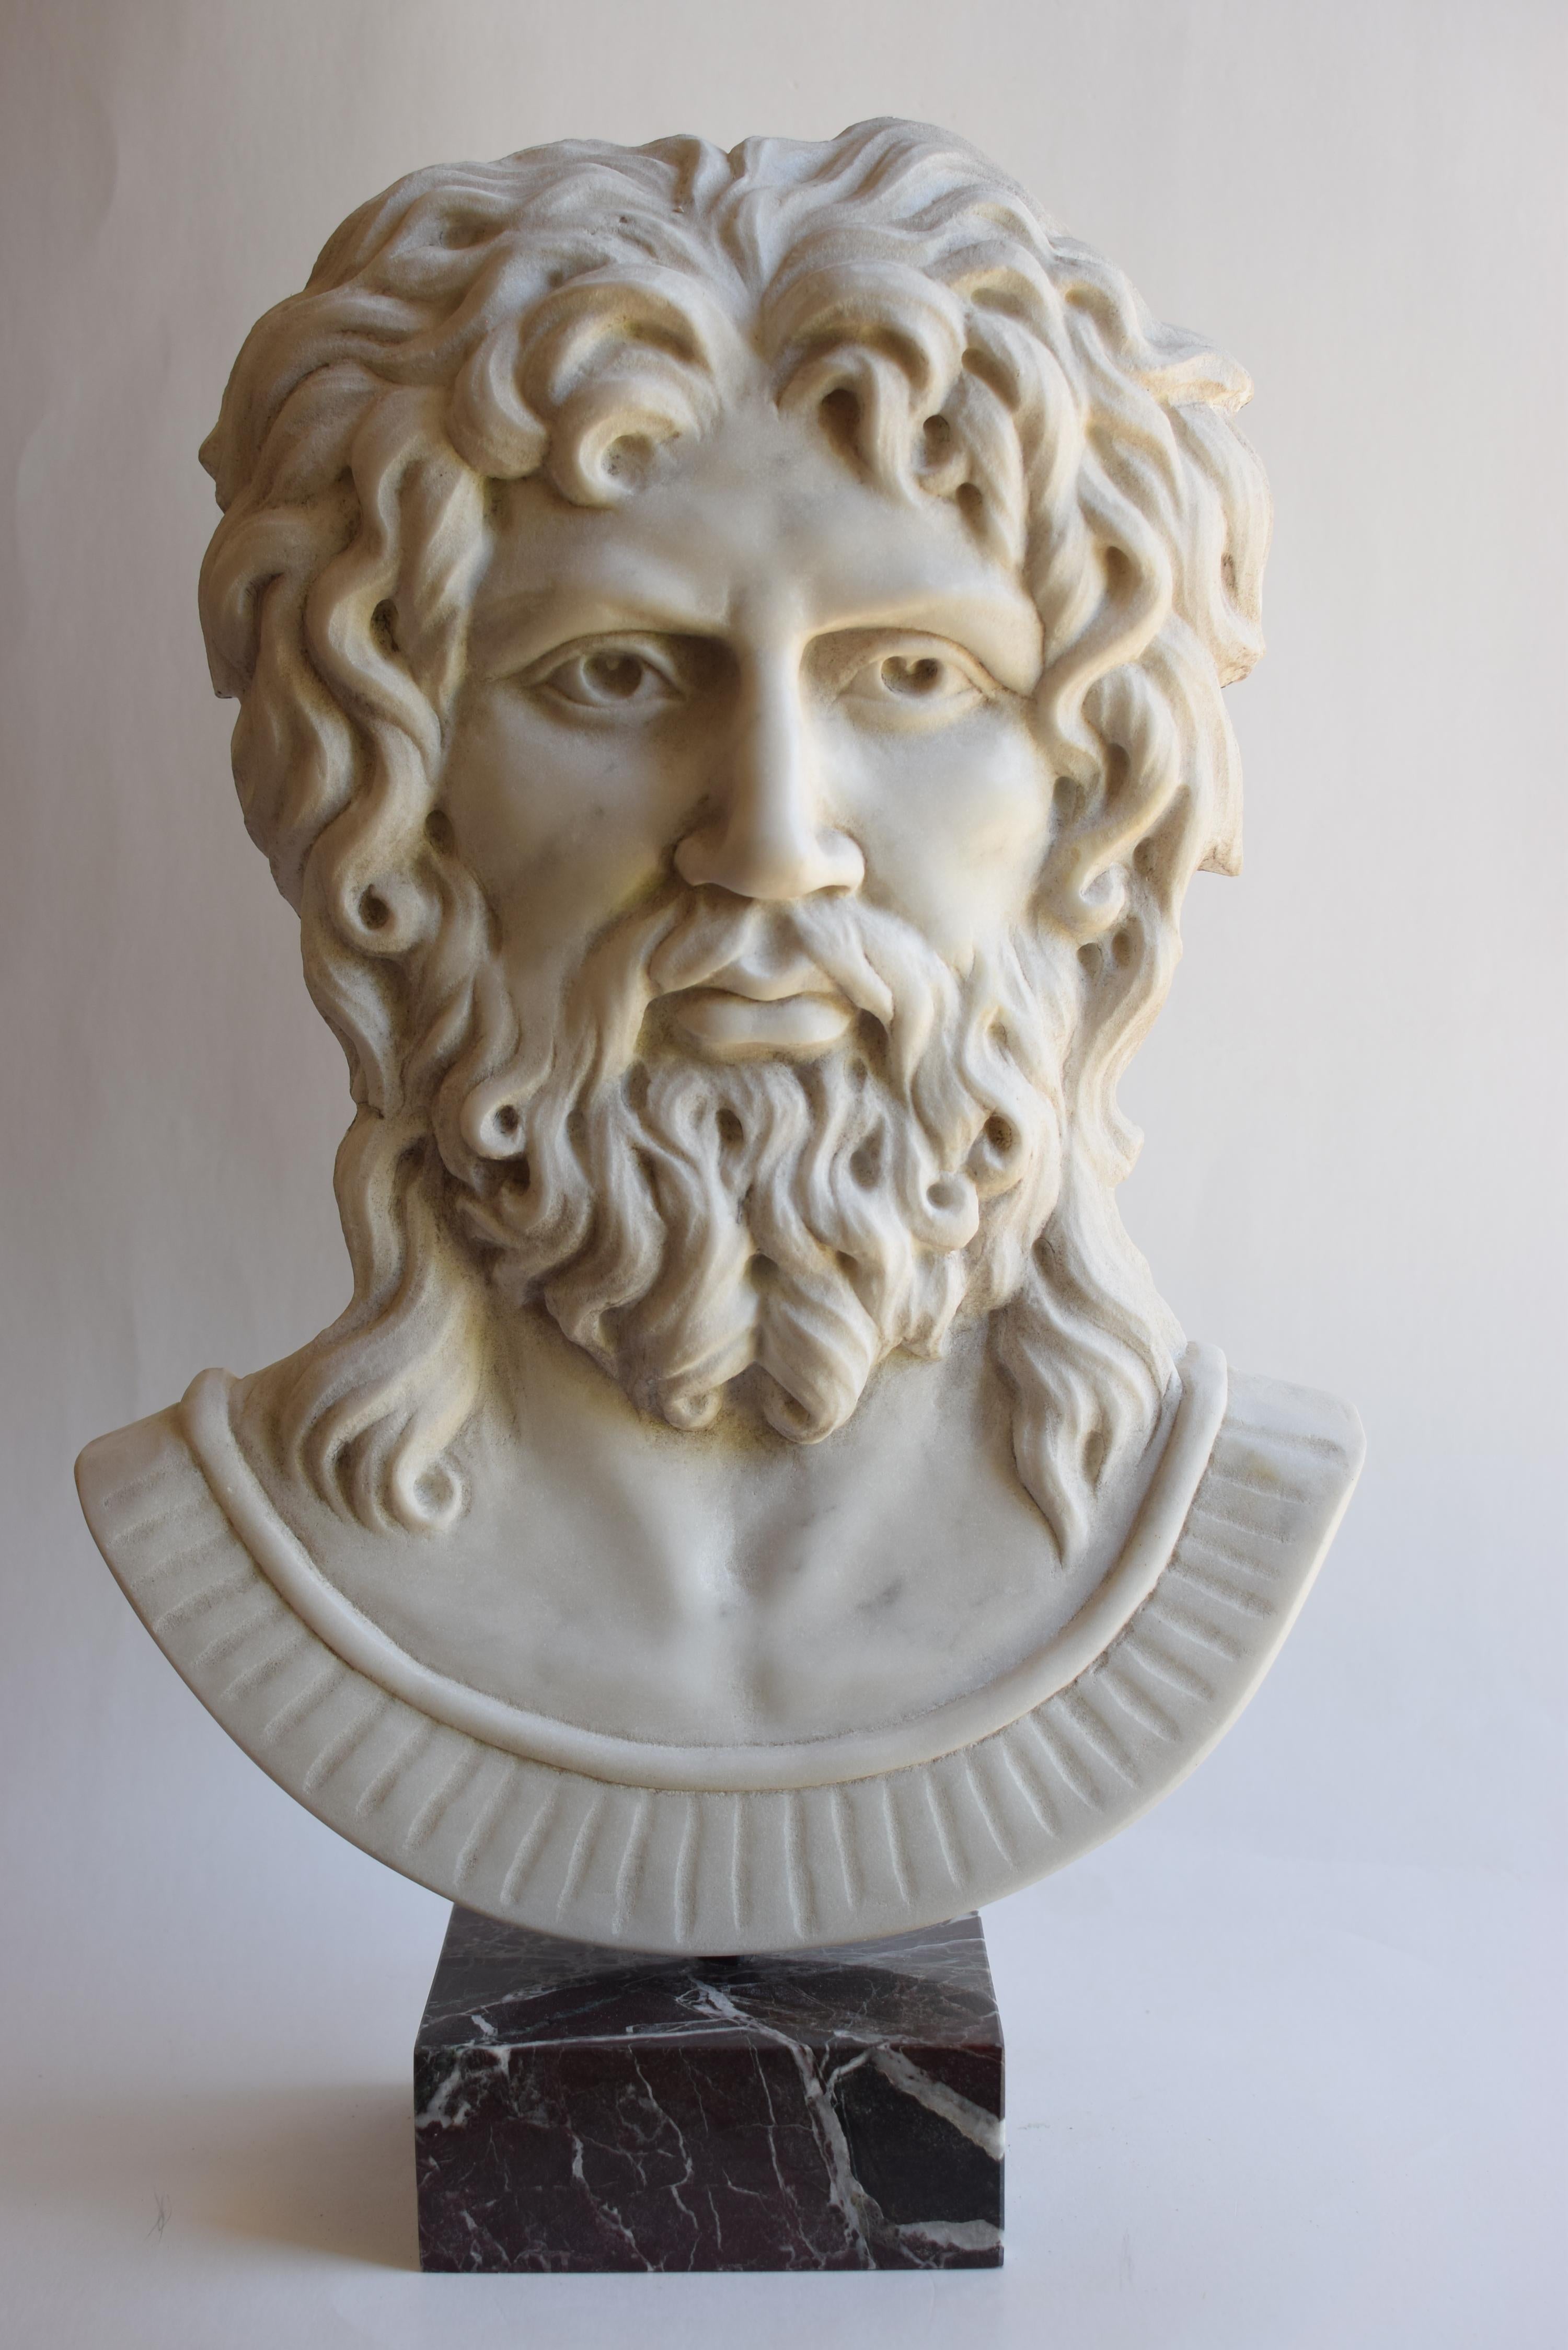 Zeus high relief, Jupiter marble, Zeus marble head, Zeus altemps sculpture, Zeus marble, Jupiter Carrara marble.
Beautiful high relief sculpture of a Head of Zeus, made of white Carrara marble placed on a base of red Levanzo marble
Modello originale